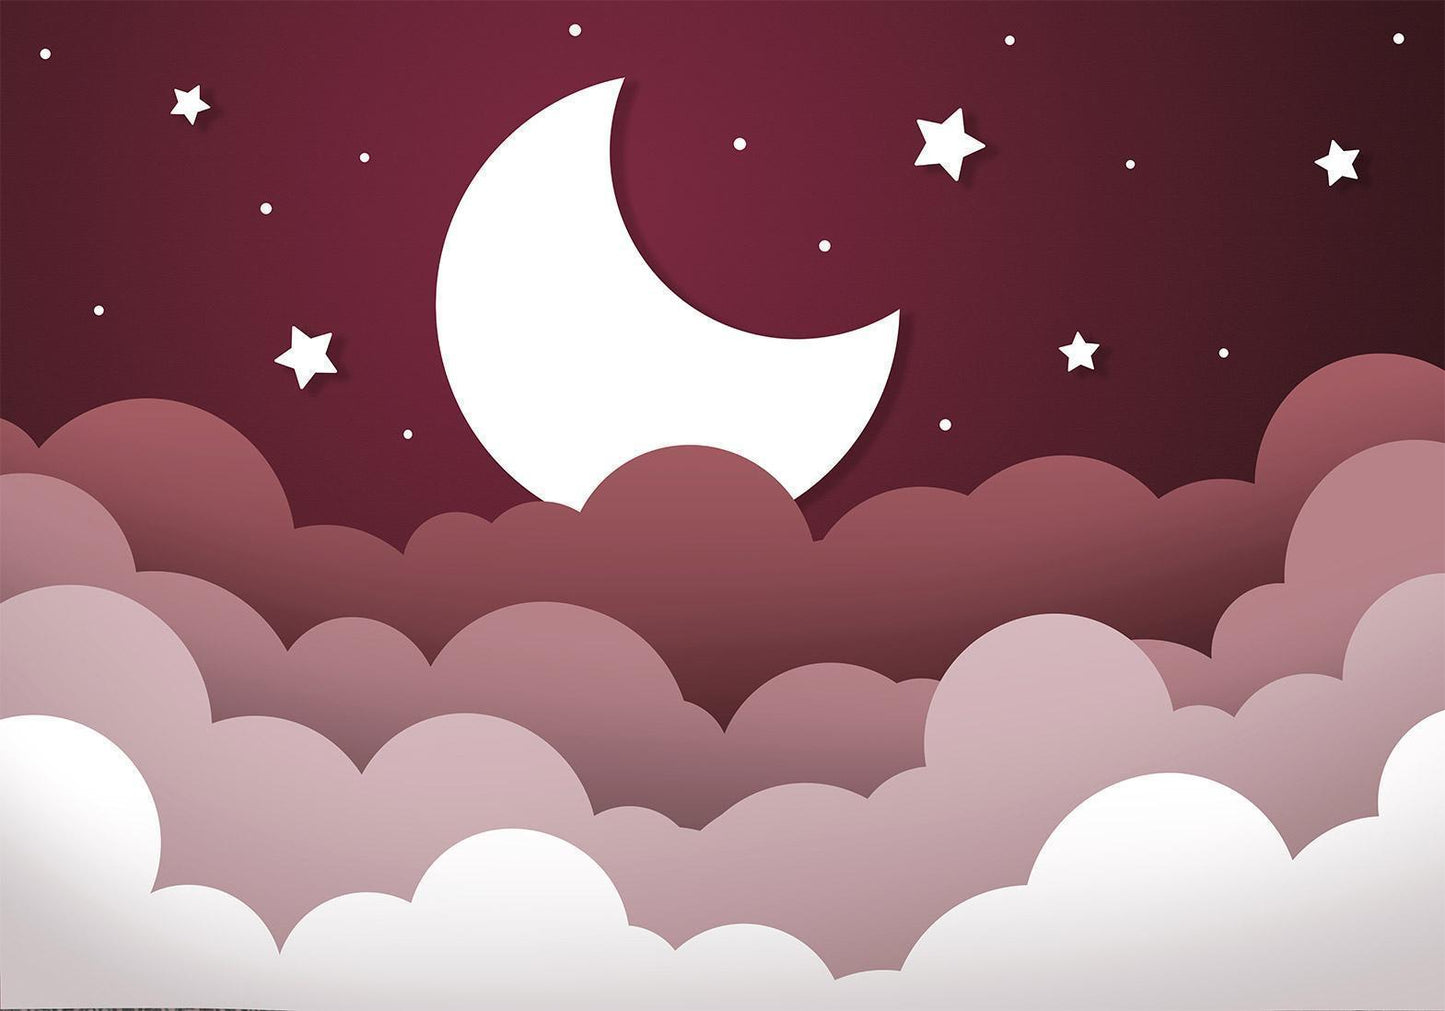 Fotobehang - Moon dream - clouds in a maroon sky with stars for children